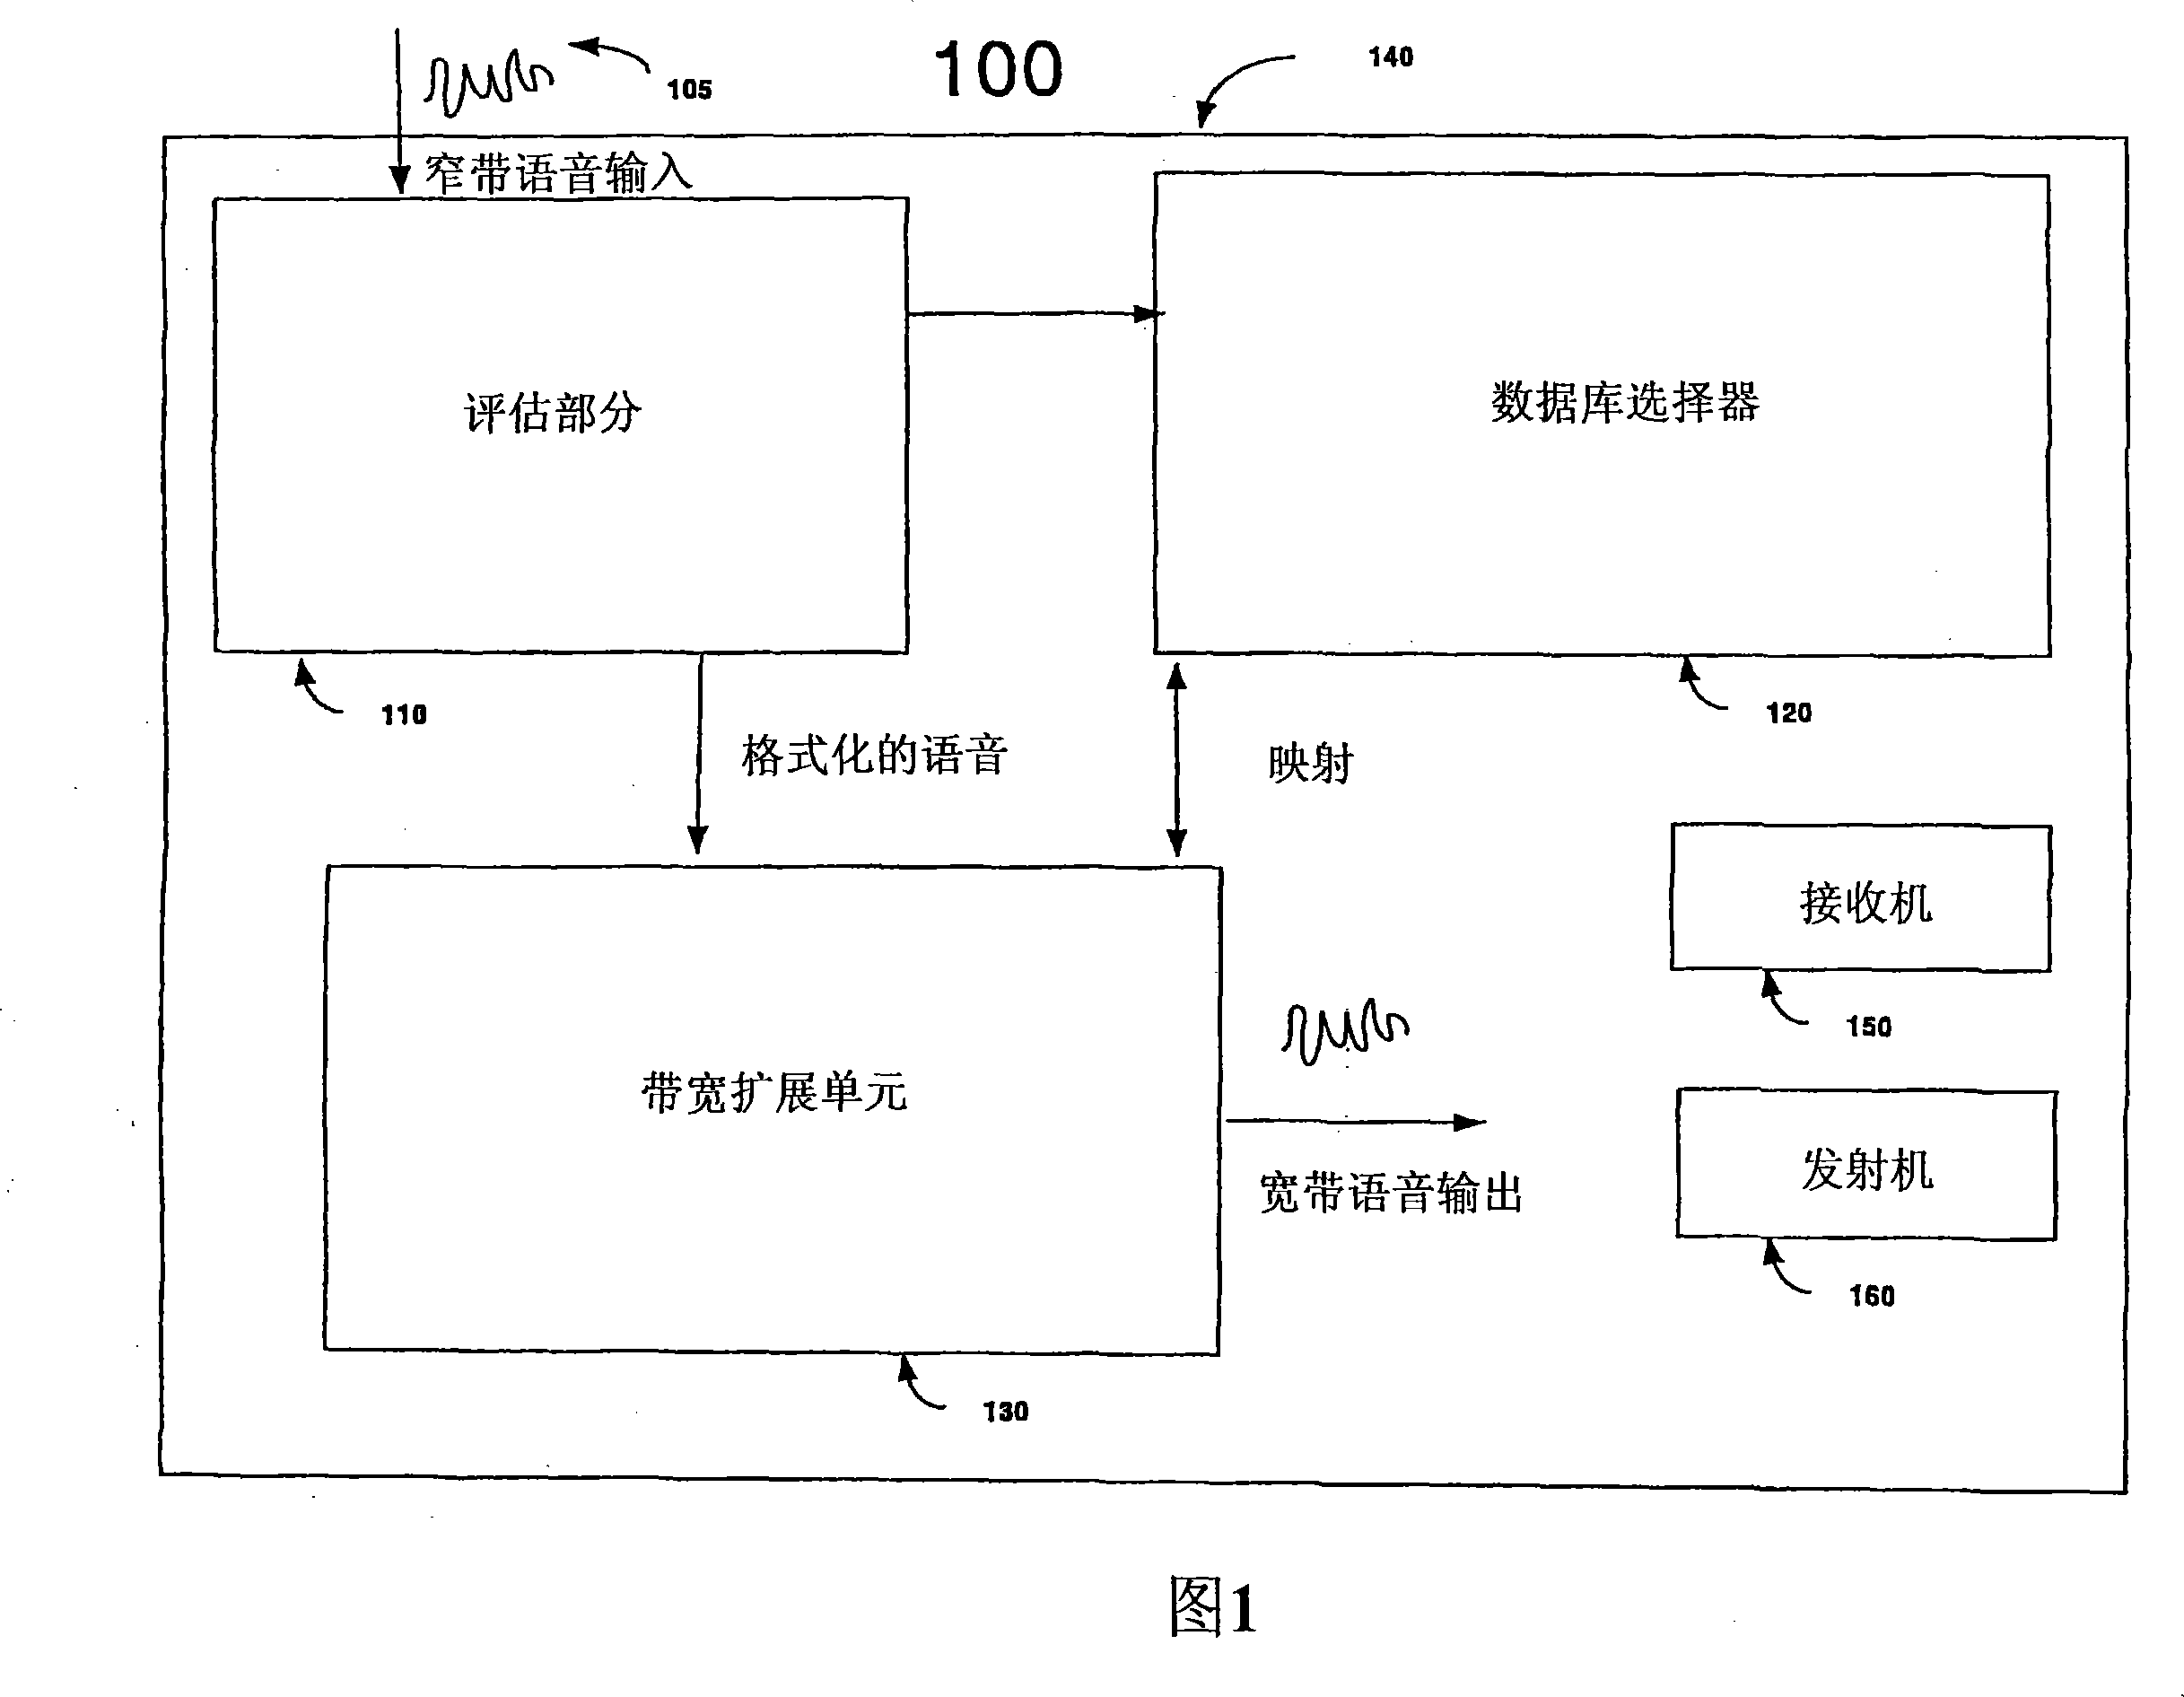 Method and system for bandwidth expansion for voice communications